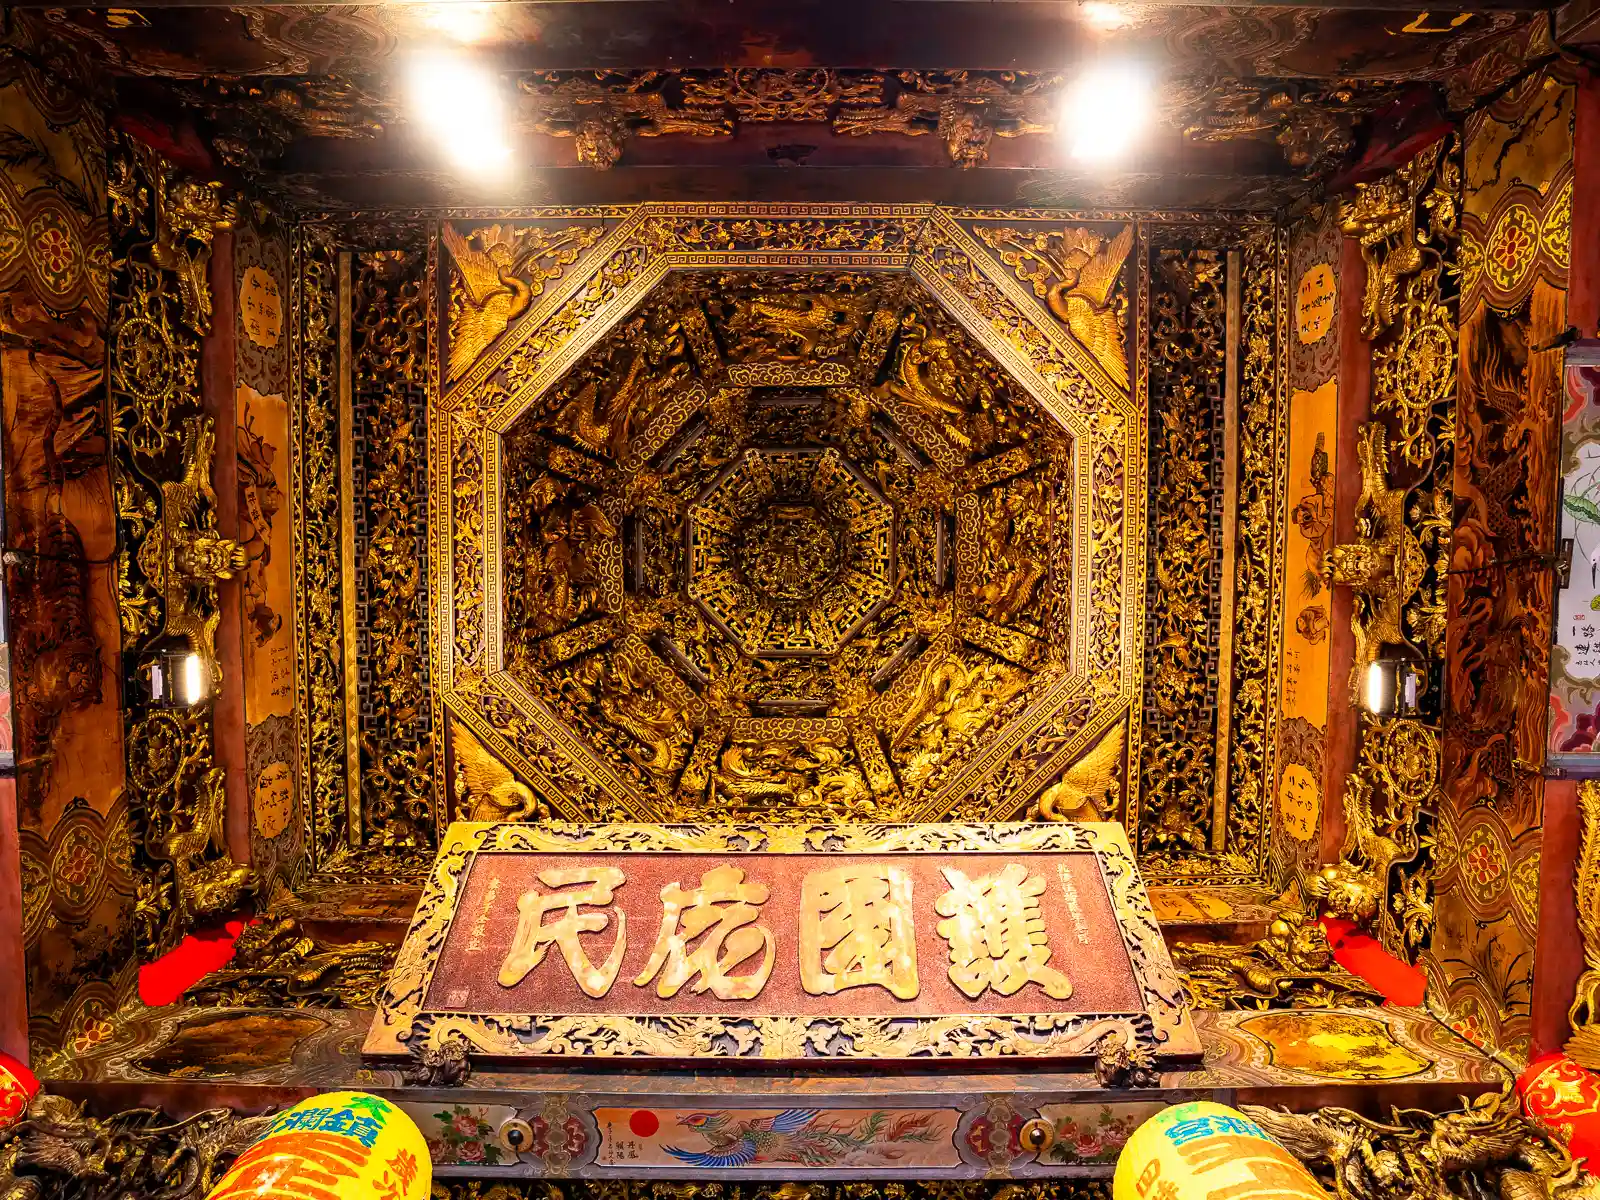 An exquisitely detailed painted gold ceiling can be seen.